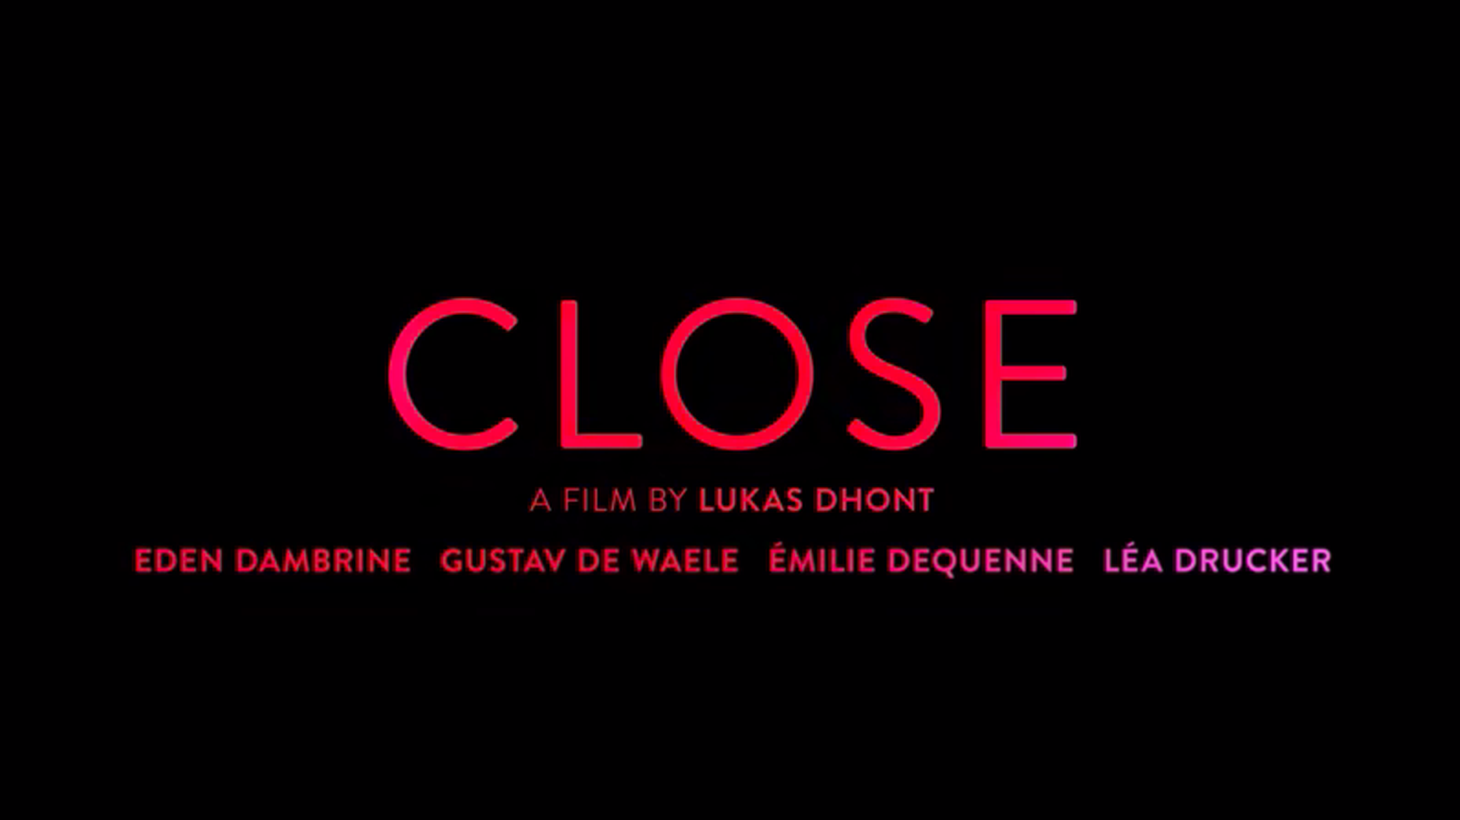 Oscar nominee “Close” is about two teen boys whose friendship is questioned.